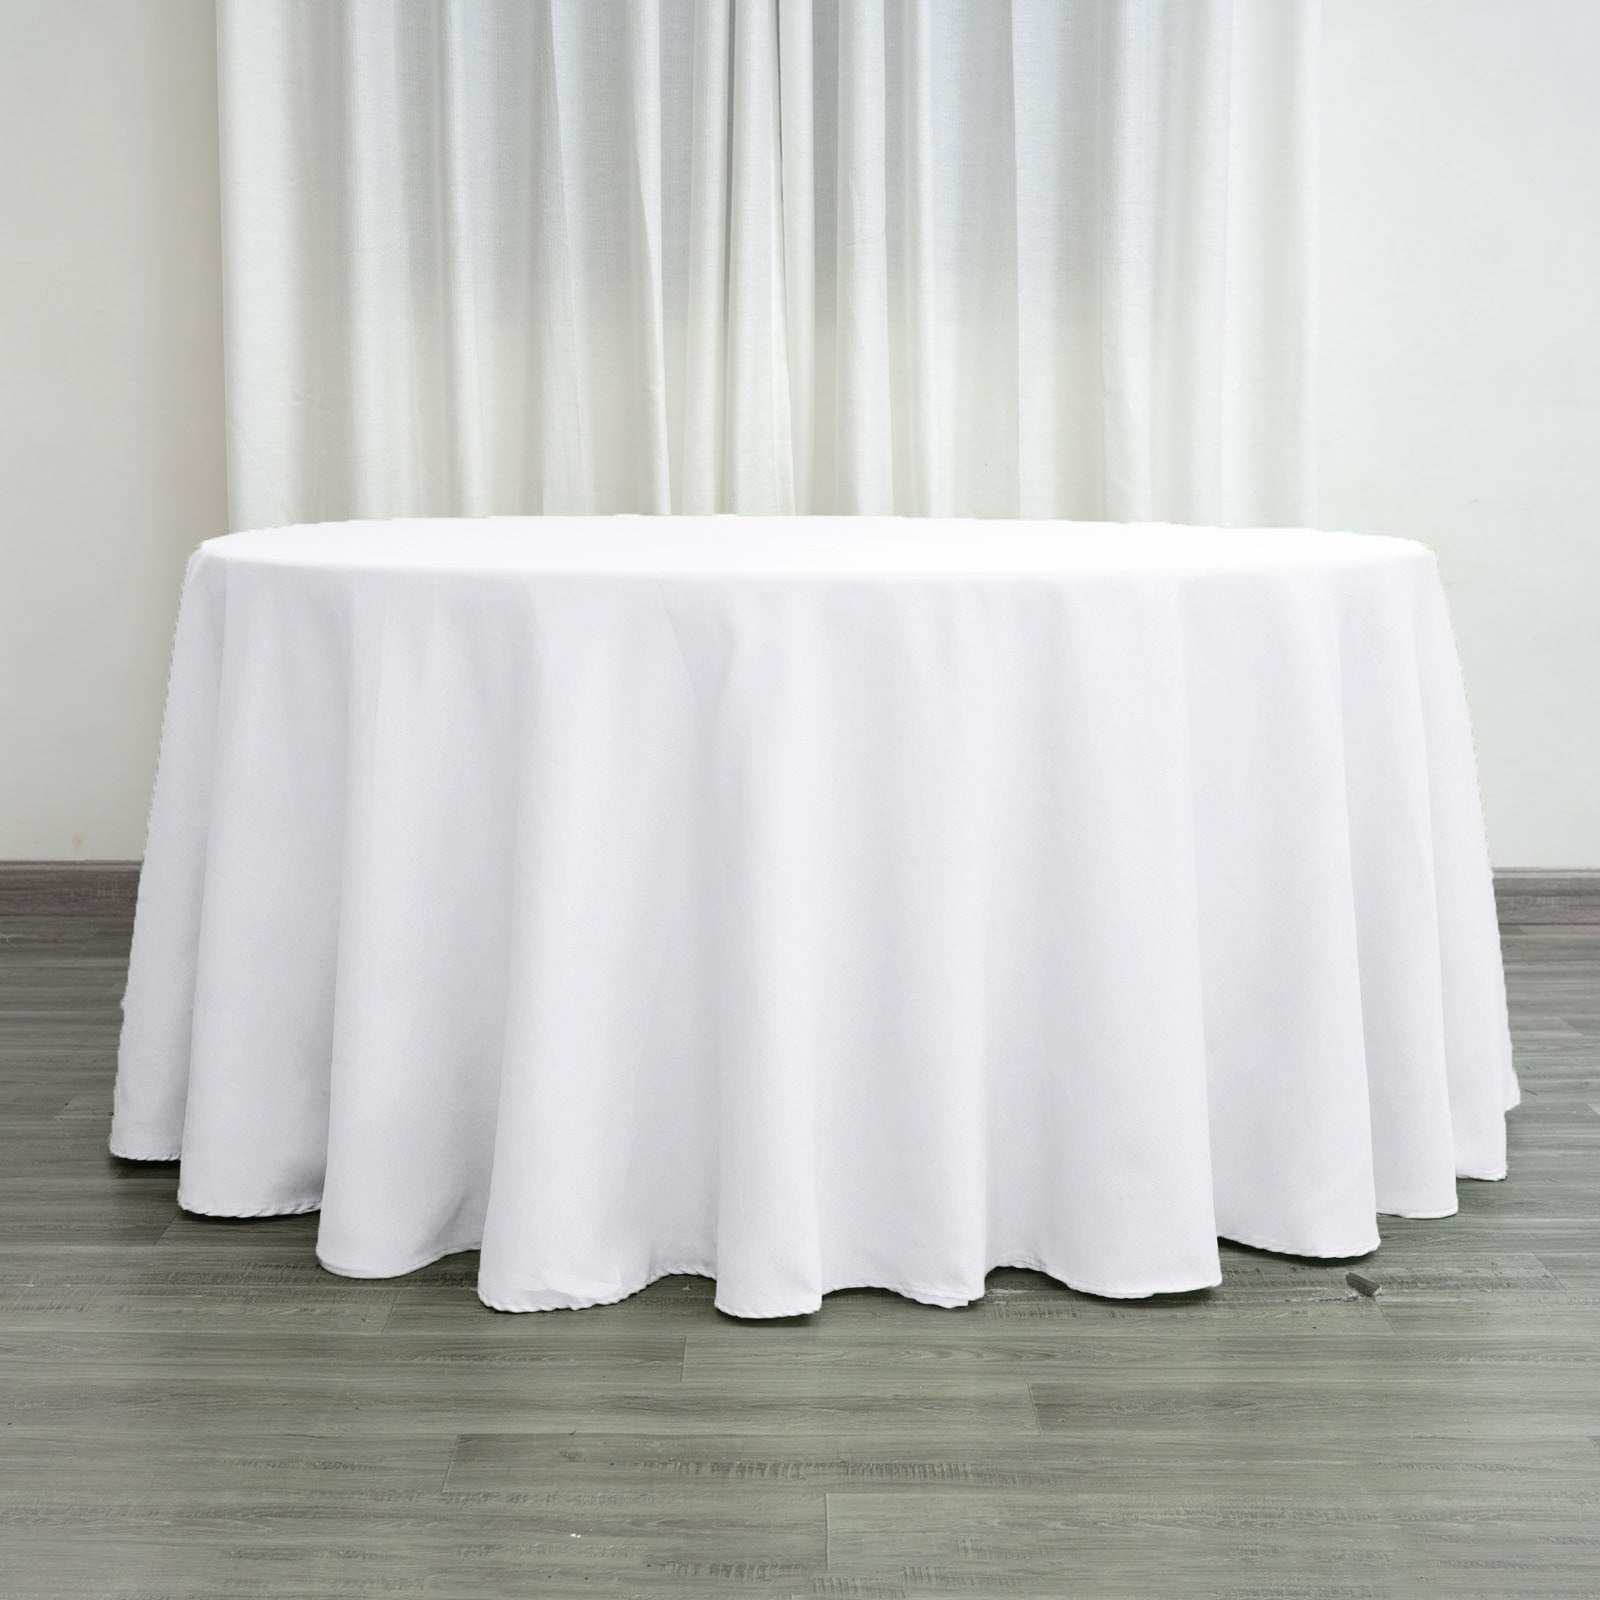 Should Tablecloths Touch The Floor